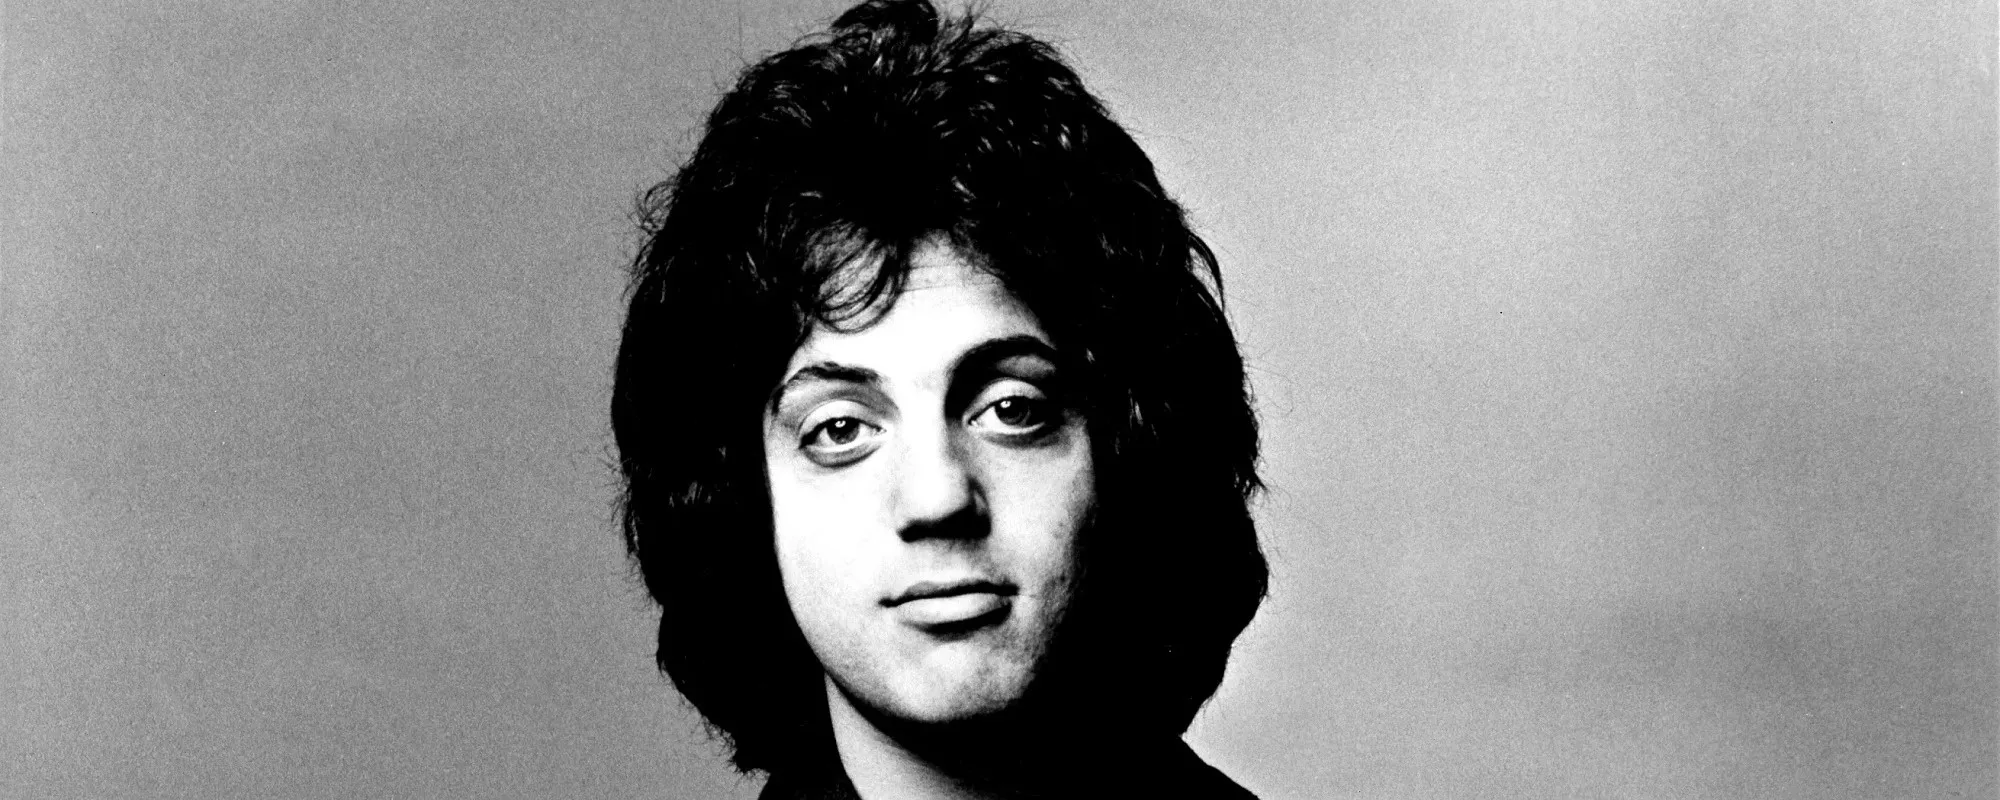 Billy Joel Recalls the “Odd Situation” That Inspired His Breakout Hit “Piano Man”